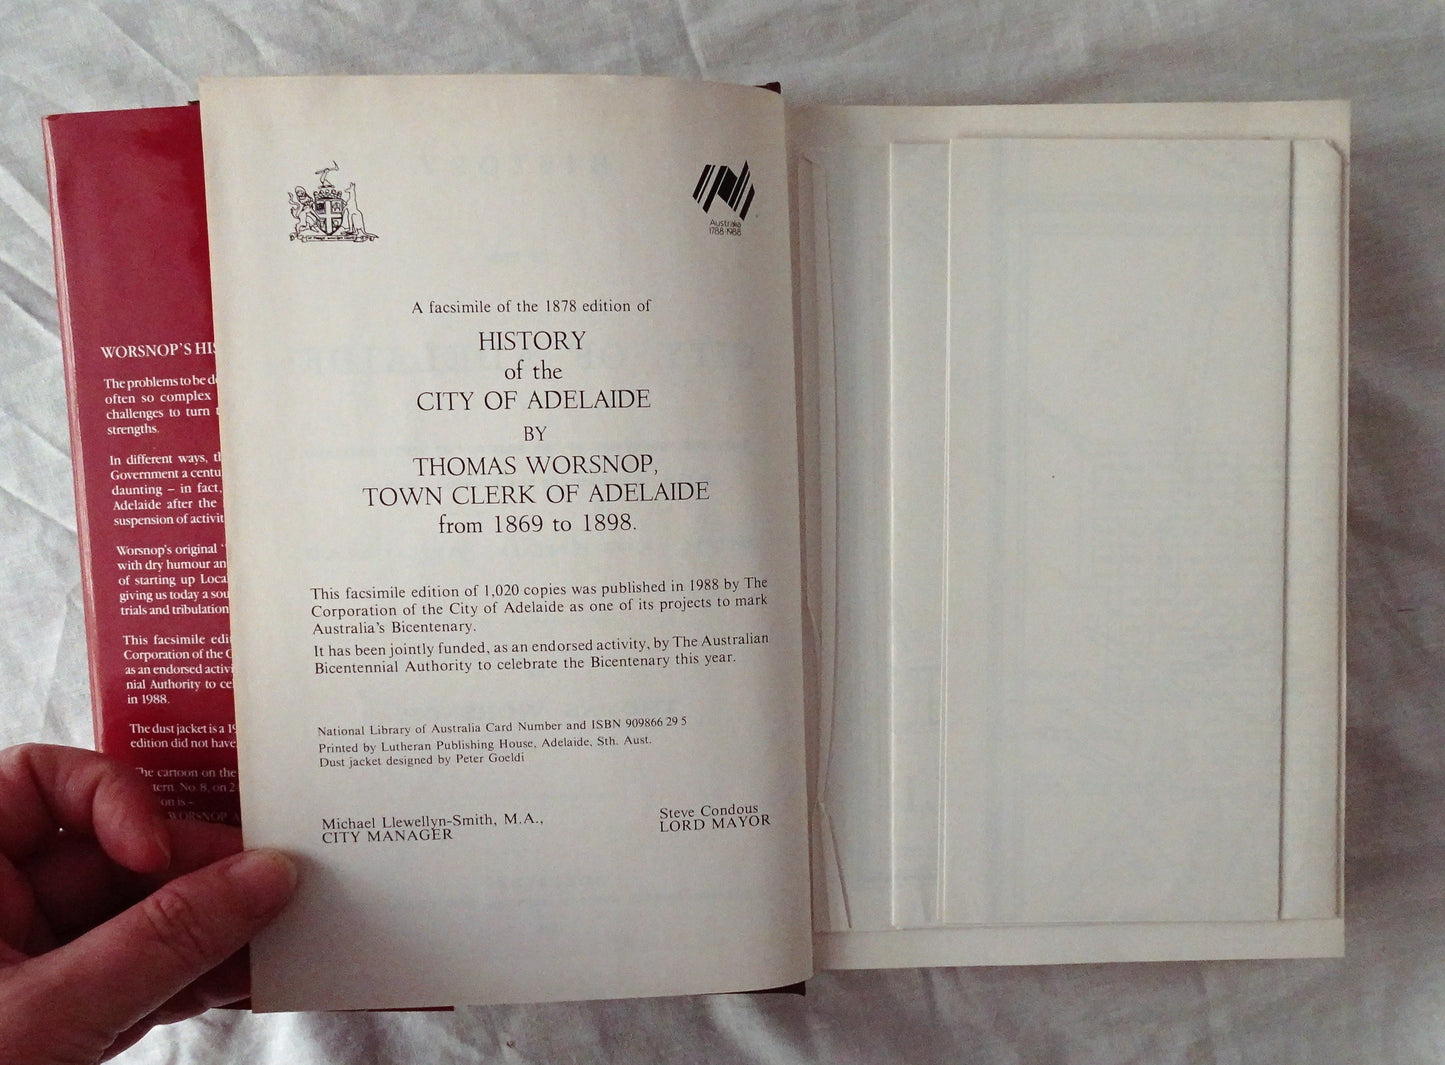 History of the City of Adelaide by Thomas Worsnop